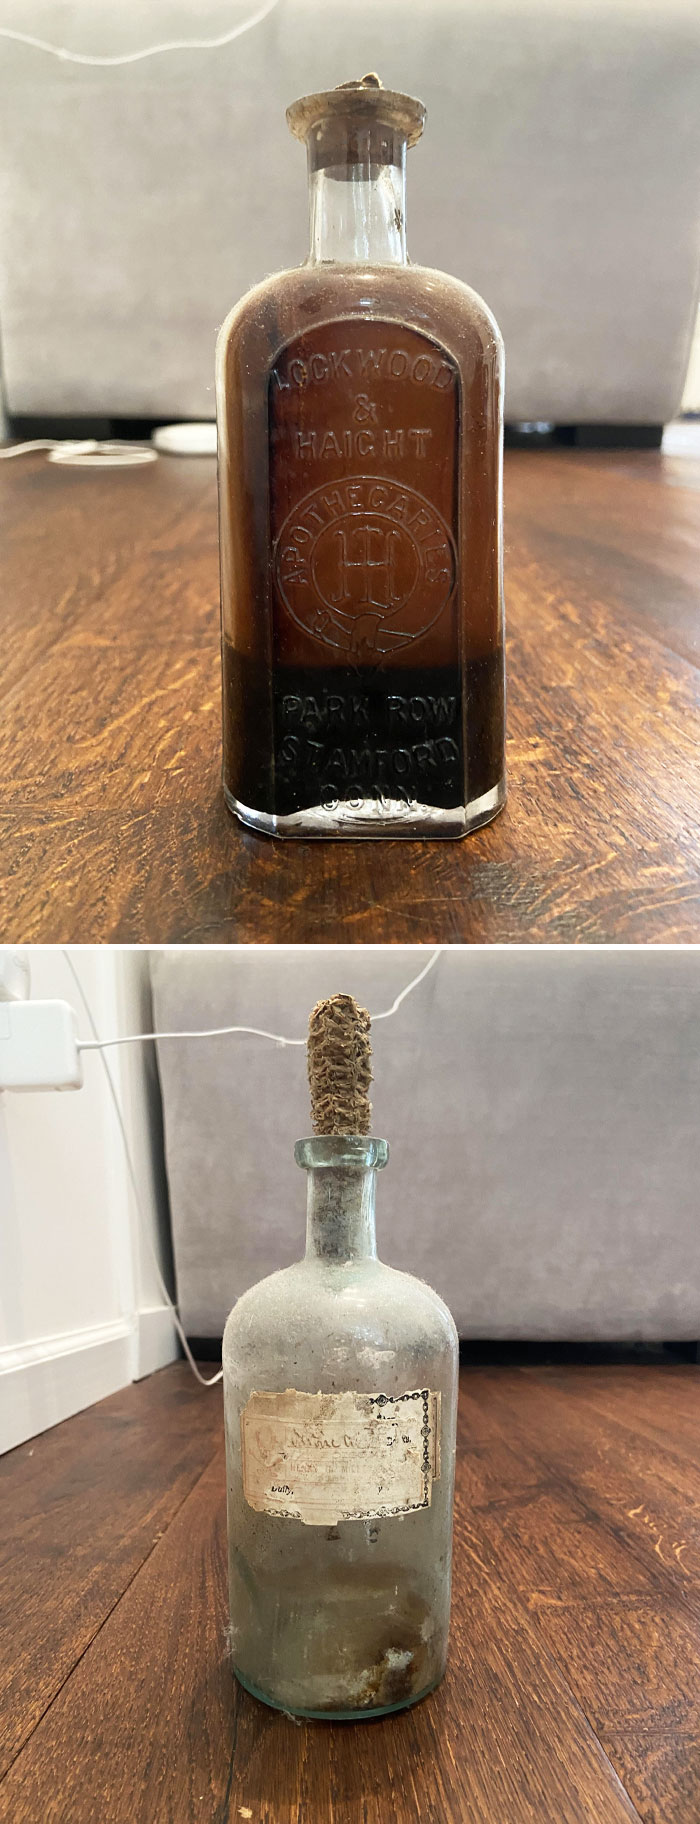 What Are These Old Bottles Found In The Walls Of My House Built In The 1800s? Westchester, New York